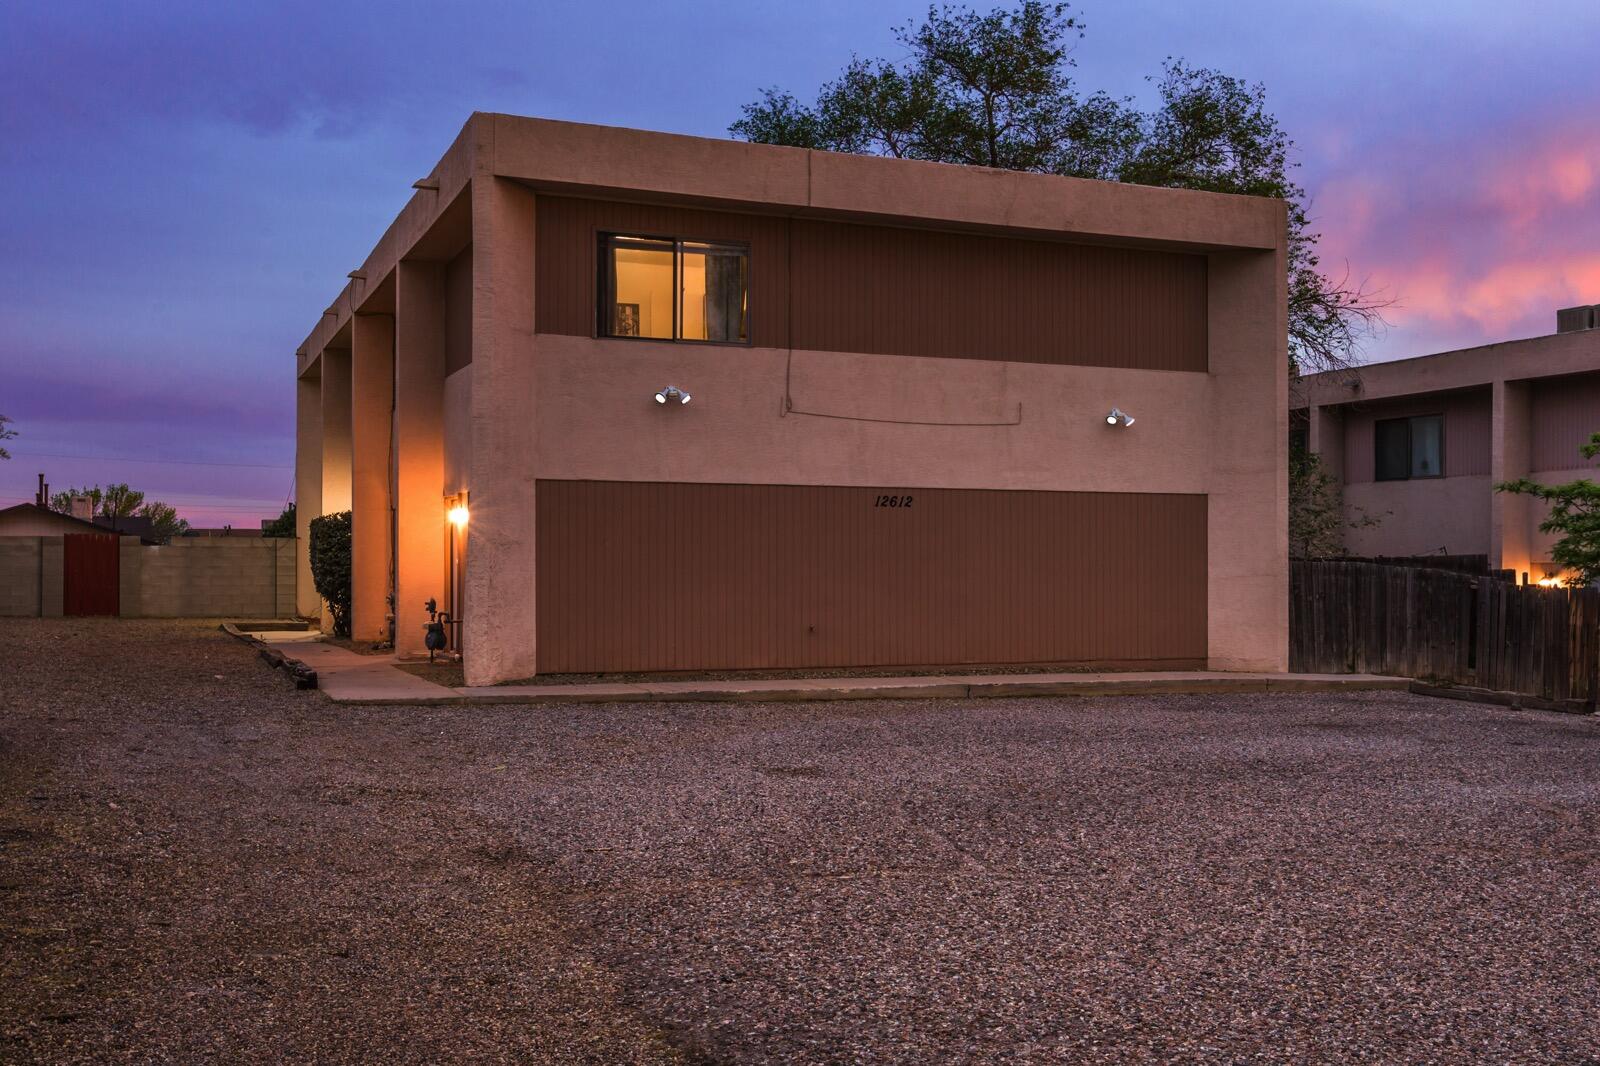 12612 Copperwood Drive NE, Albuquerque, New Mexico 87123, 2 Bedrooms Bedrooms, ,1 BathroomBathrooms,Residential Income,For Sale,12612 Copperwood Drive NE,1062290